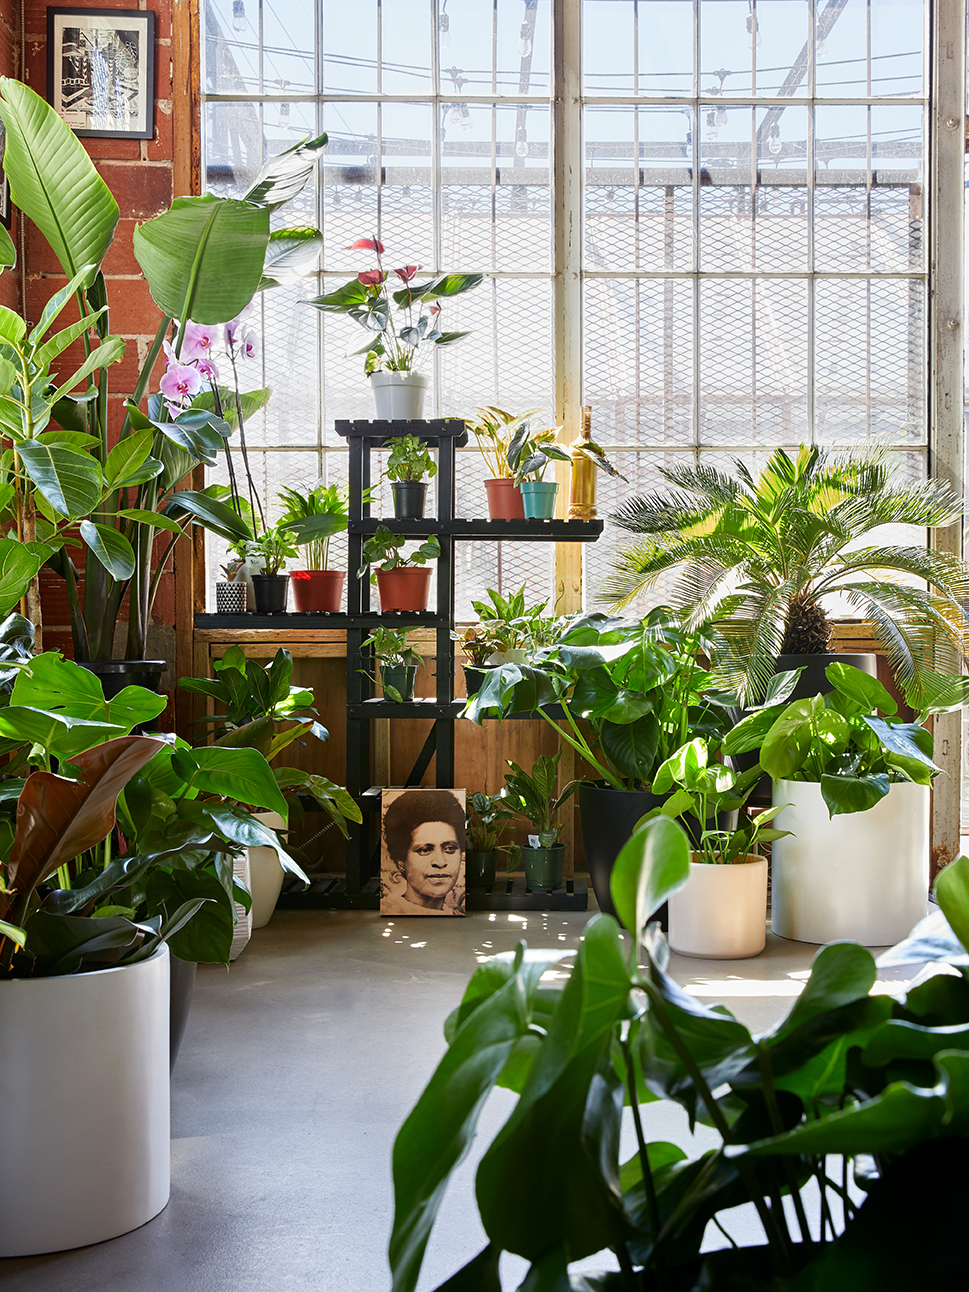 inside garden shop with plants